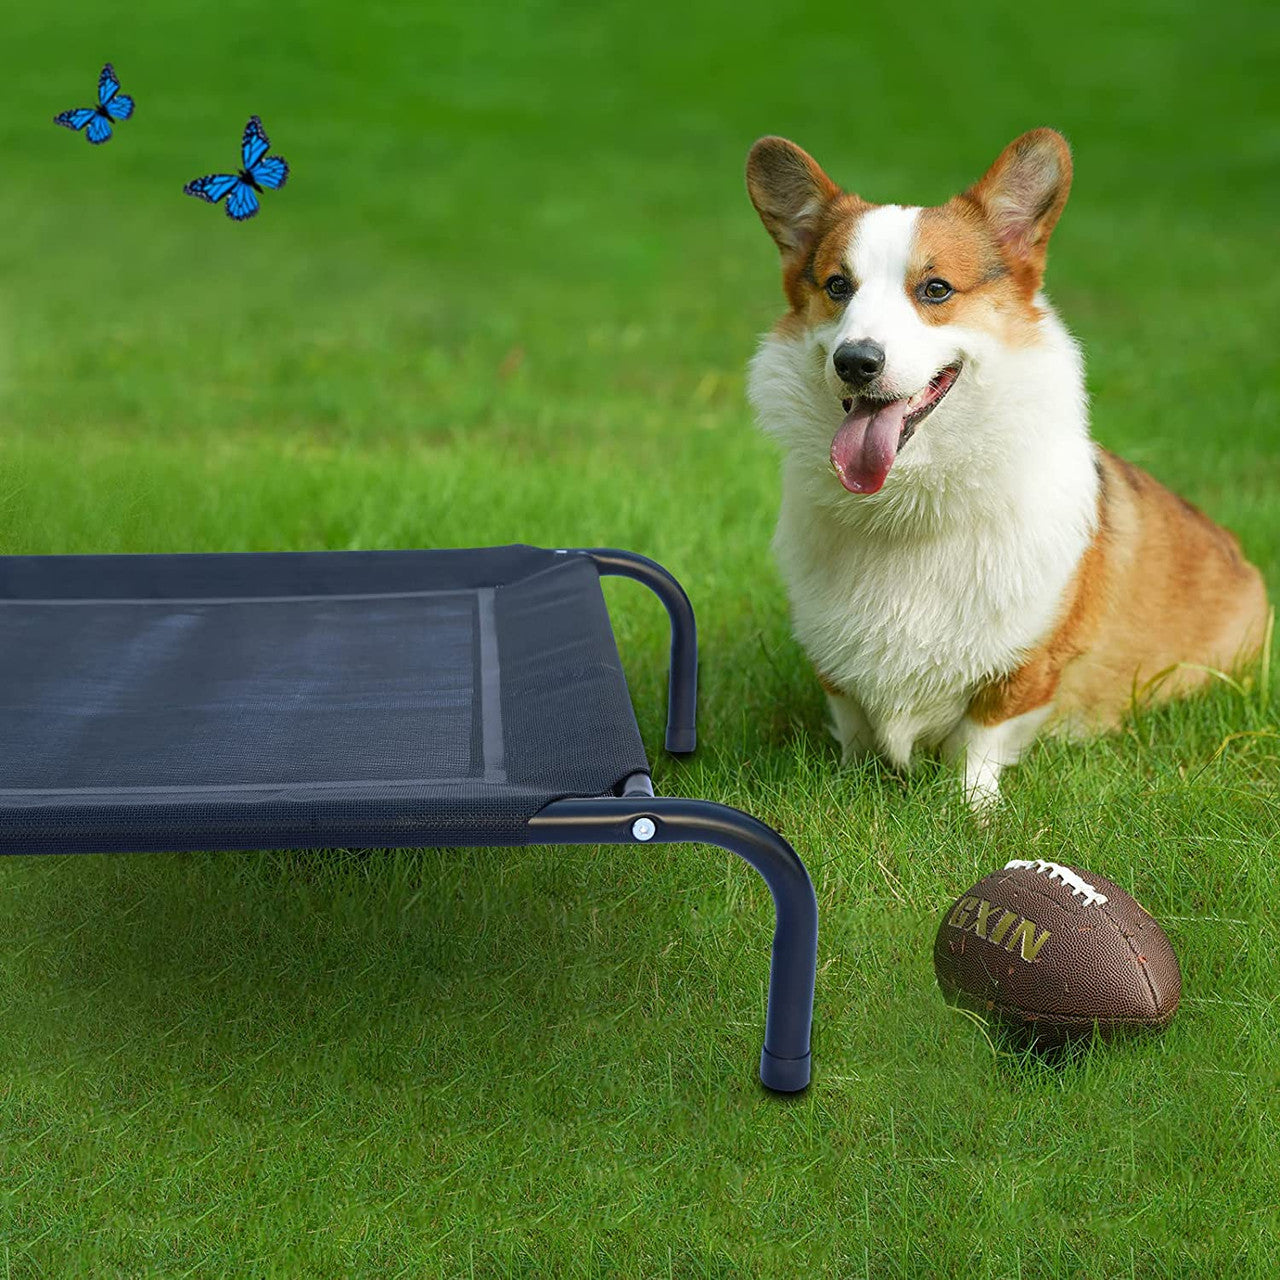 Portable Elevated Dog Pet Bed With Steel-Frame And Breathable Mesh For Small Medium Dogs And Cats